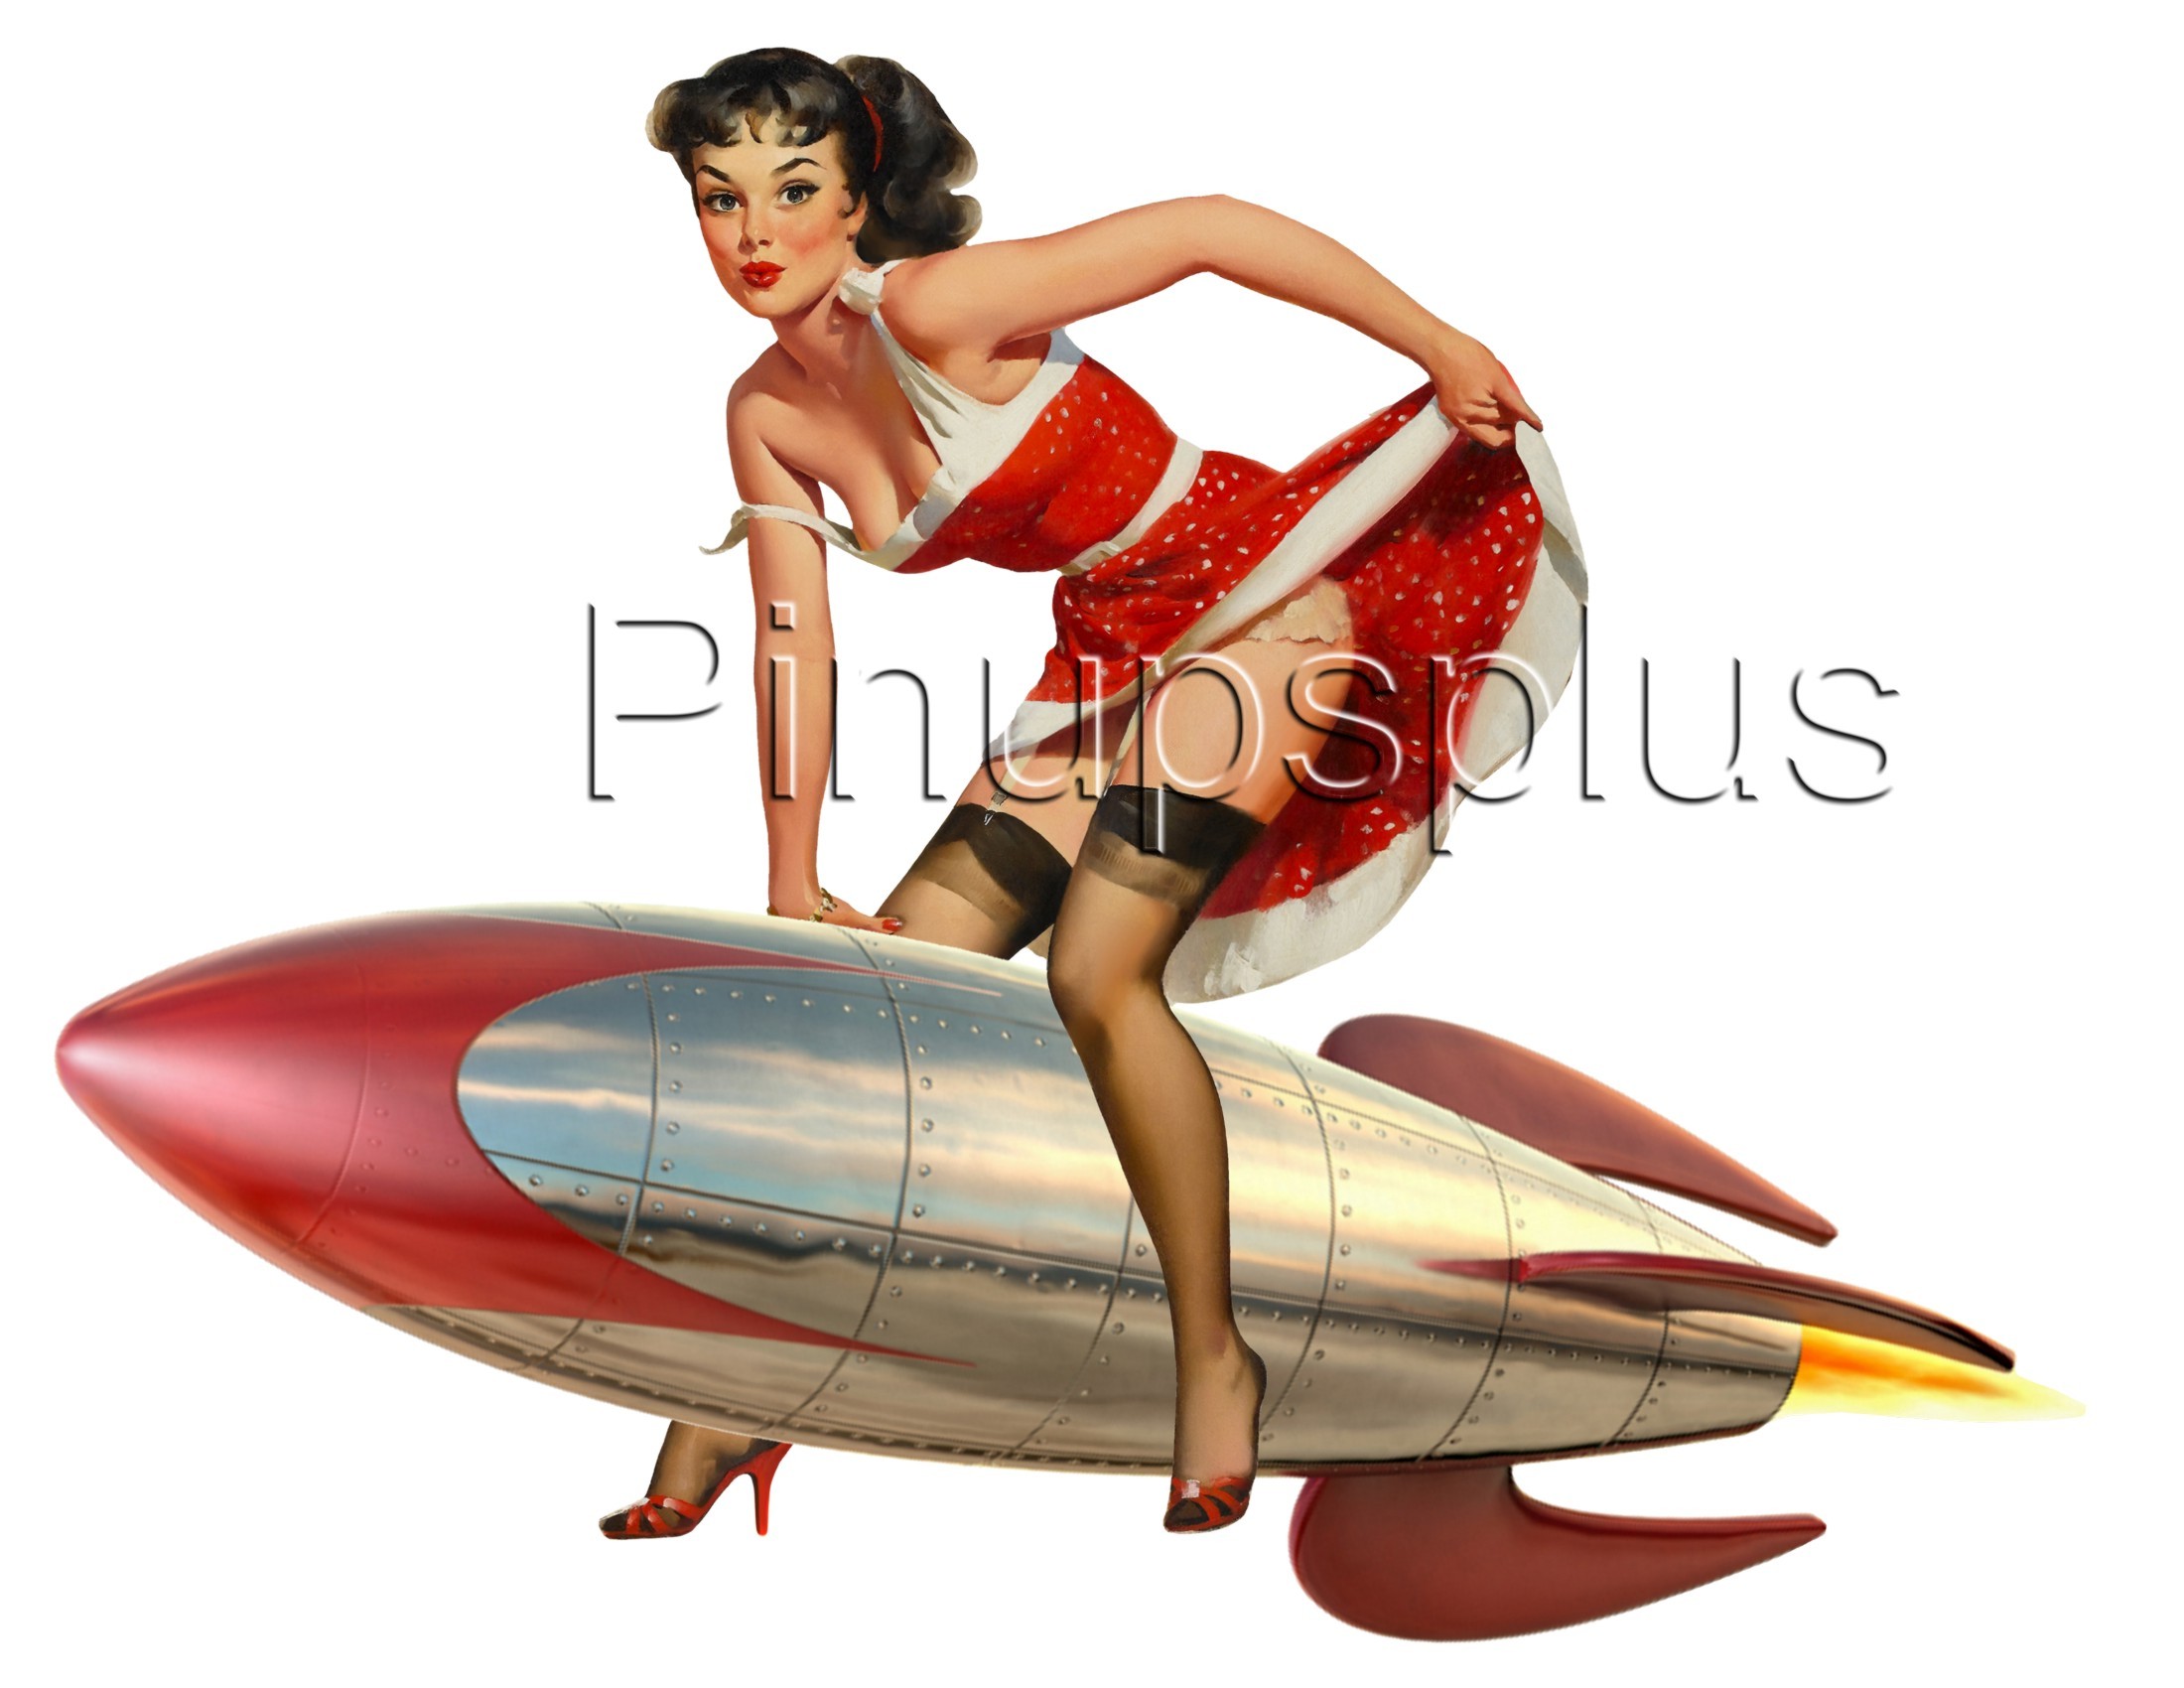 Sexy Retro Rocket Pinup Girl Waterslide Decal S870 [s870] - $4.75 ...